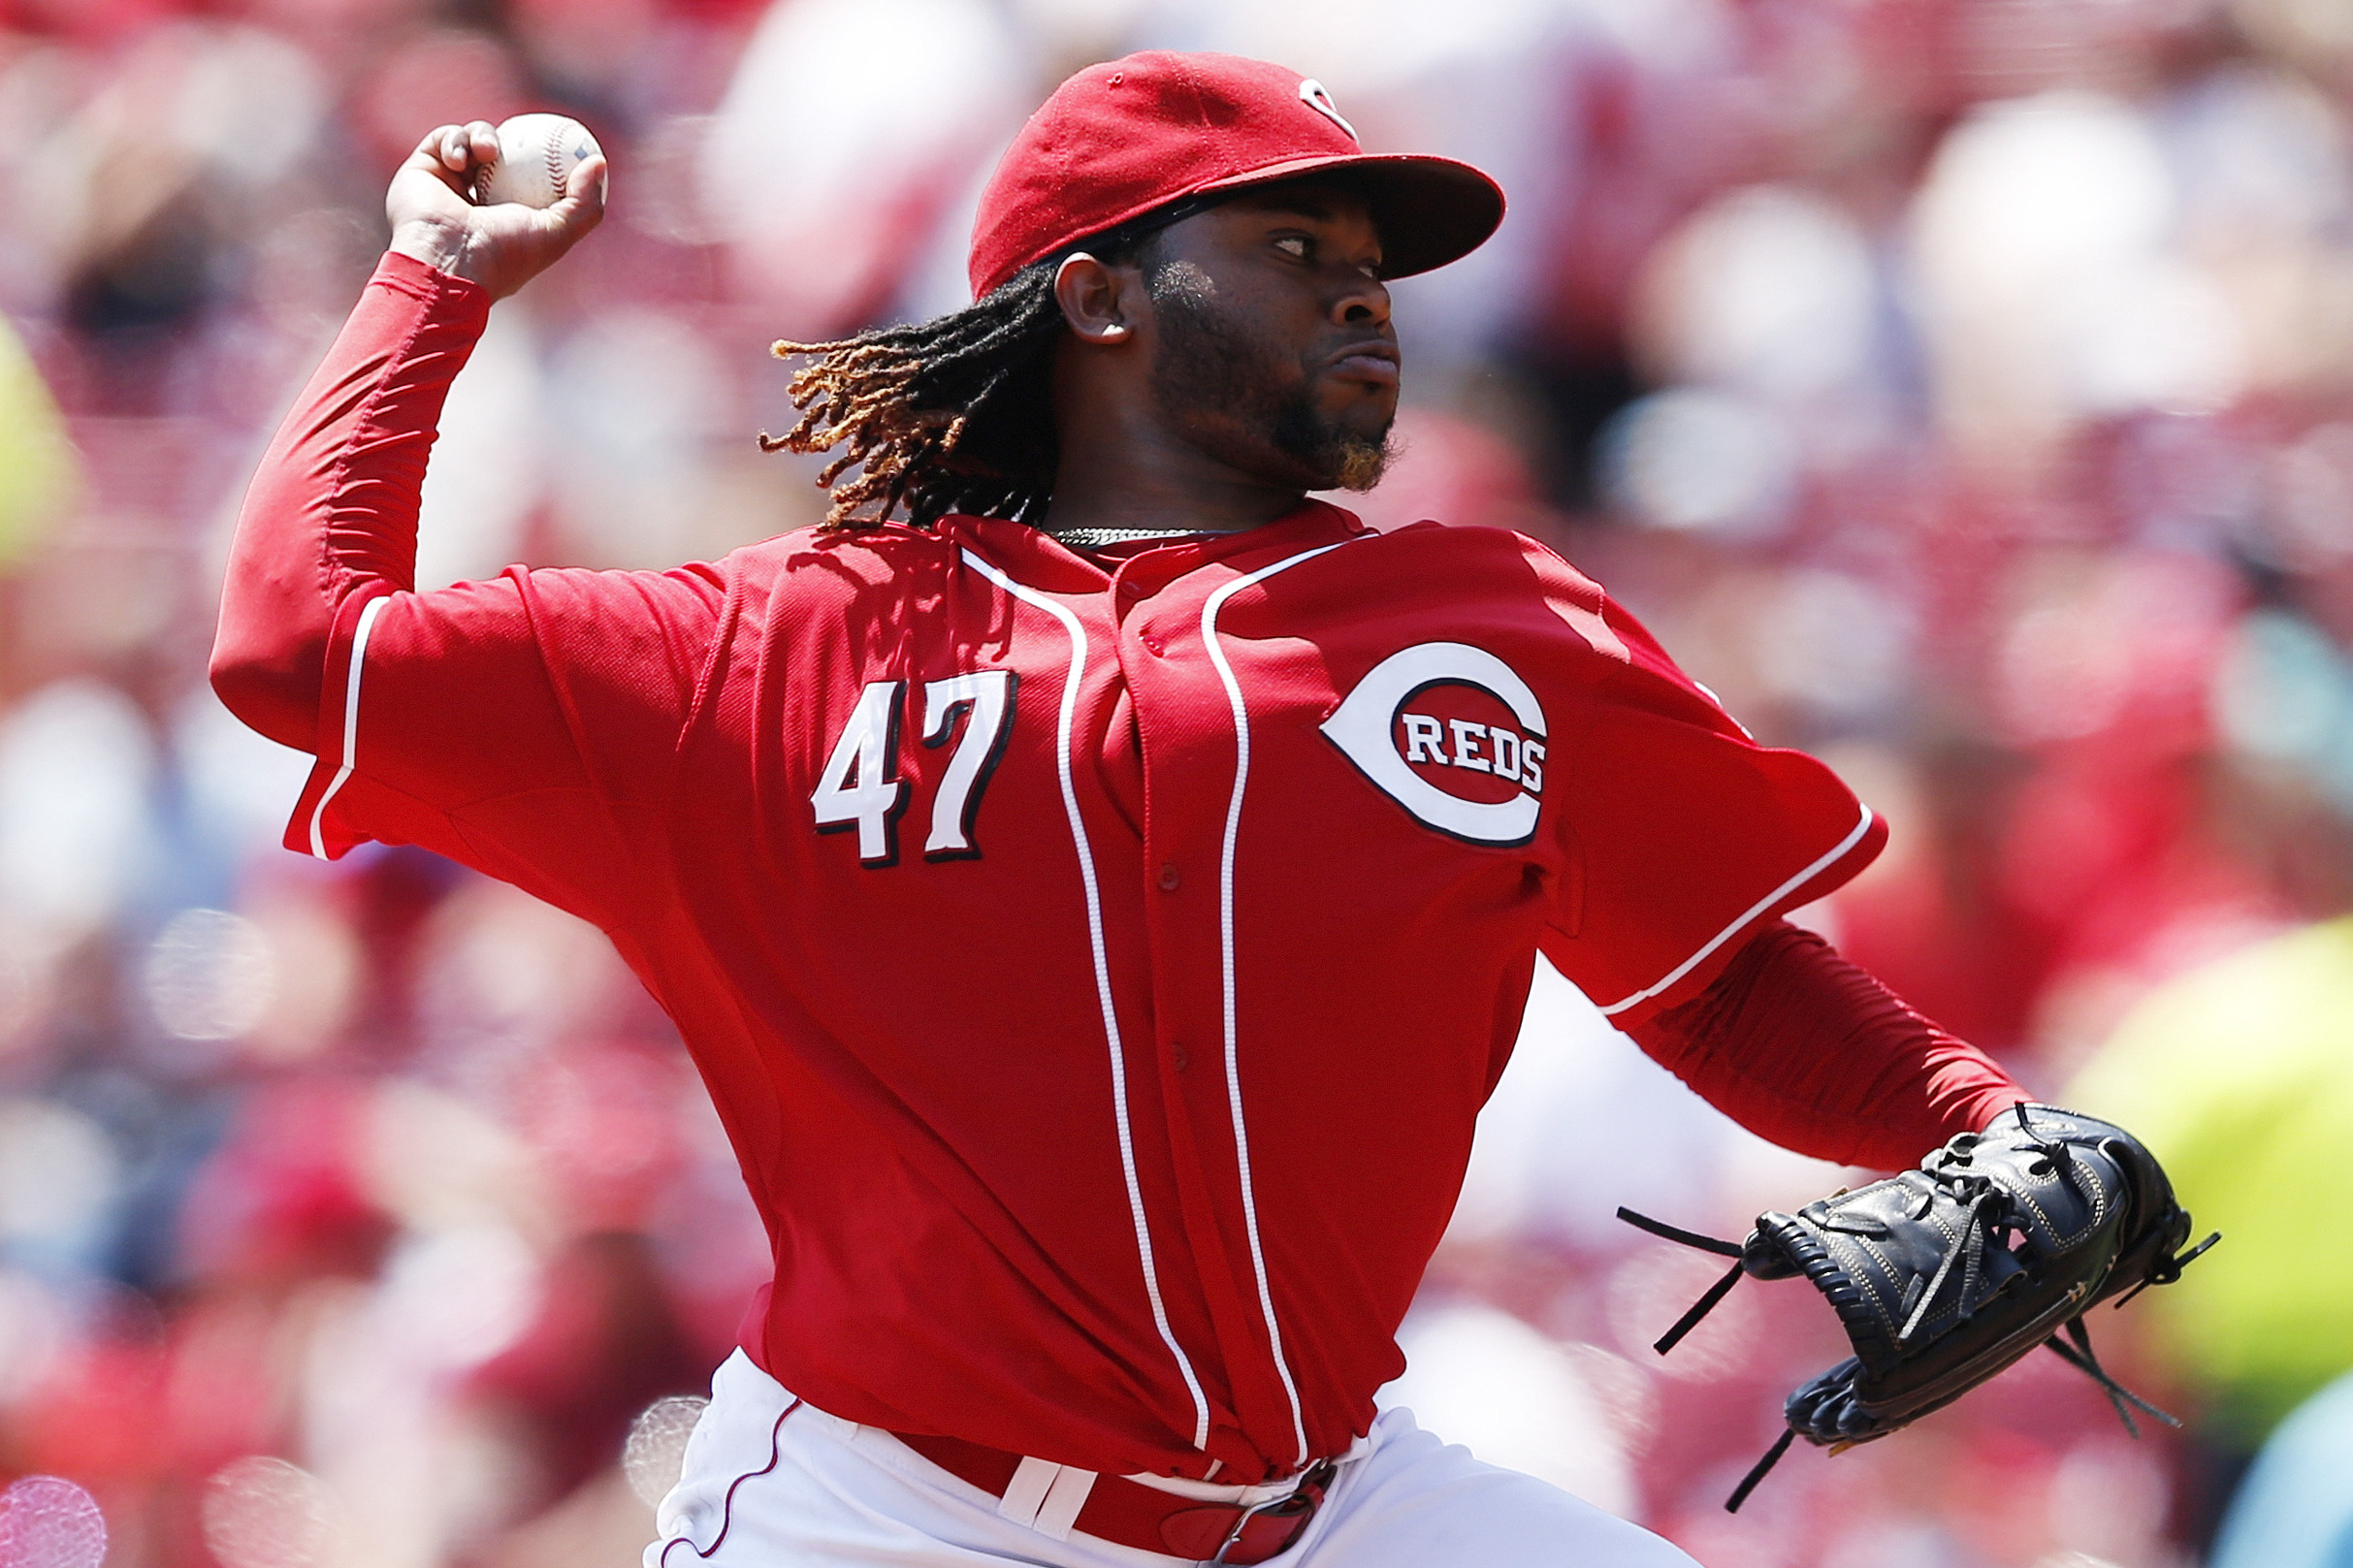 Reds fans left to long for another Johnny Cueto